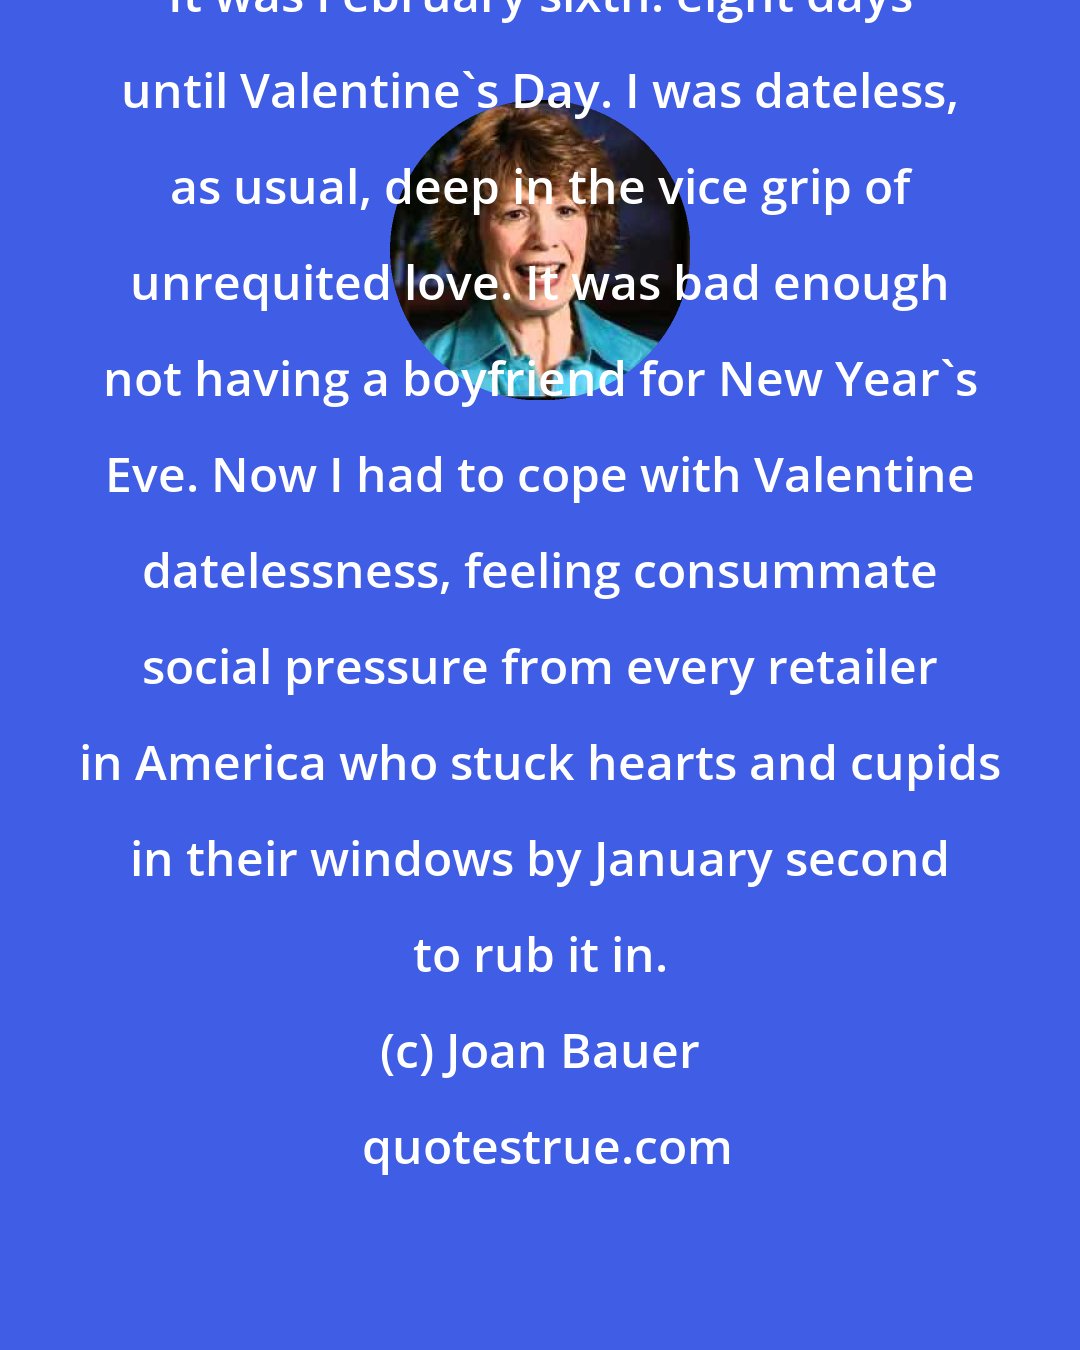 Joan Bauer: It was February sixth: eight days until Valentine's Day. I was dateless, as usual, deep in the vice grip of unrequited love. It was bad enough not having a boyfriend for New Year's Eve. Now I had to cope with Valentine datelessness, feeling consummate social pressure from every retailer in America who stuck hearts and cupids in their windows by January second to rub it in.